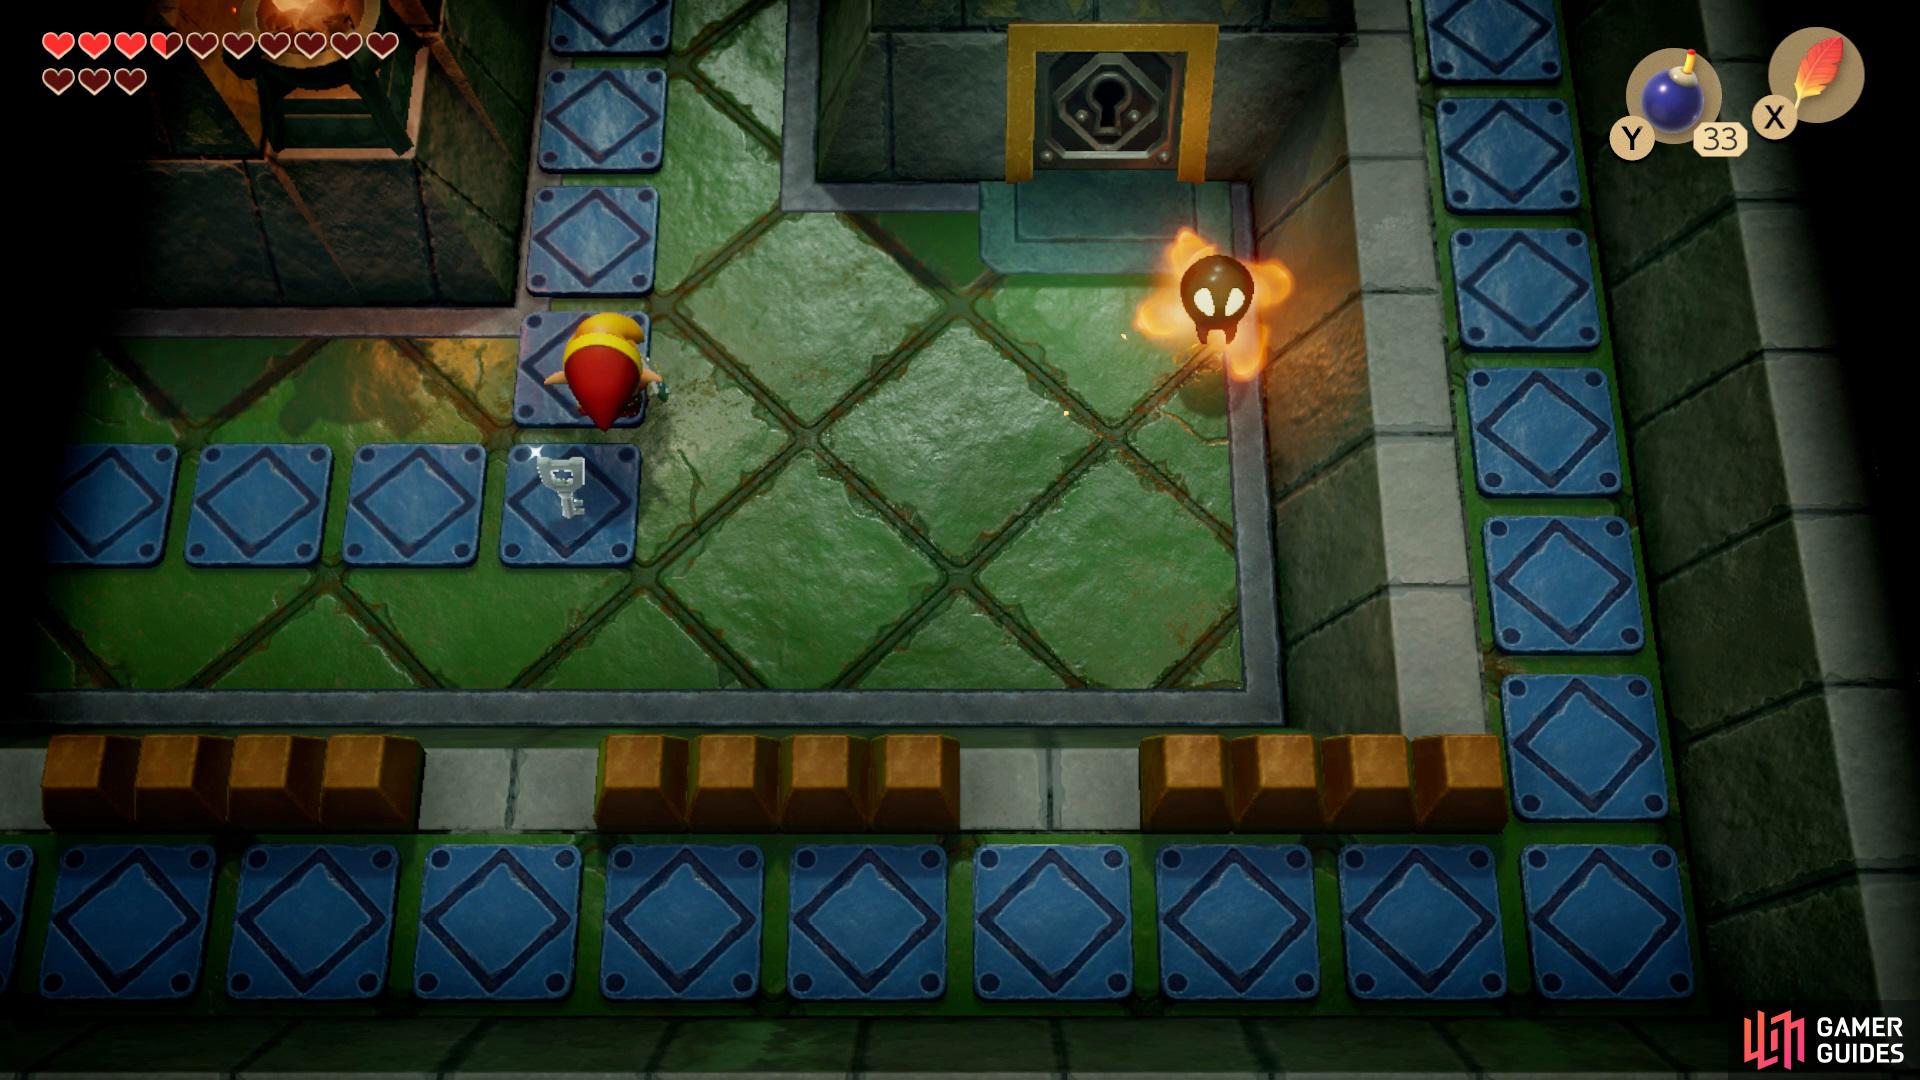 Go right from the entrance of the dungeon and kill the enemies to get a Small Key to drop,